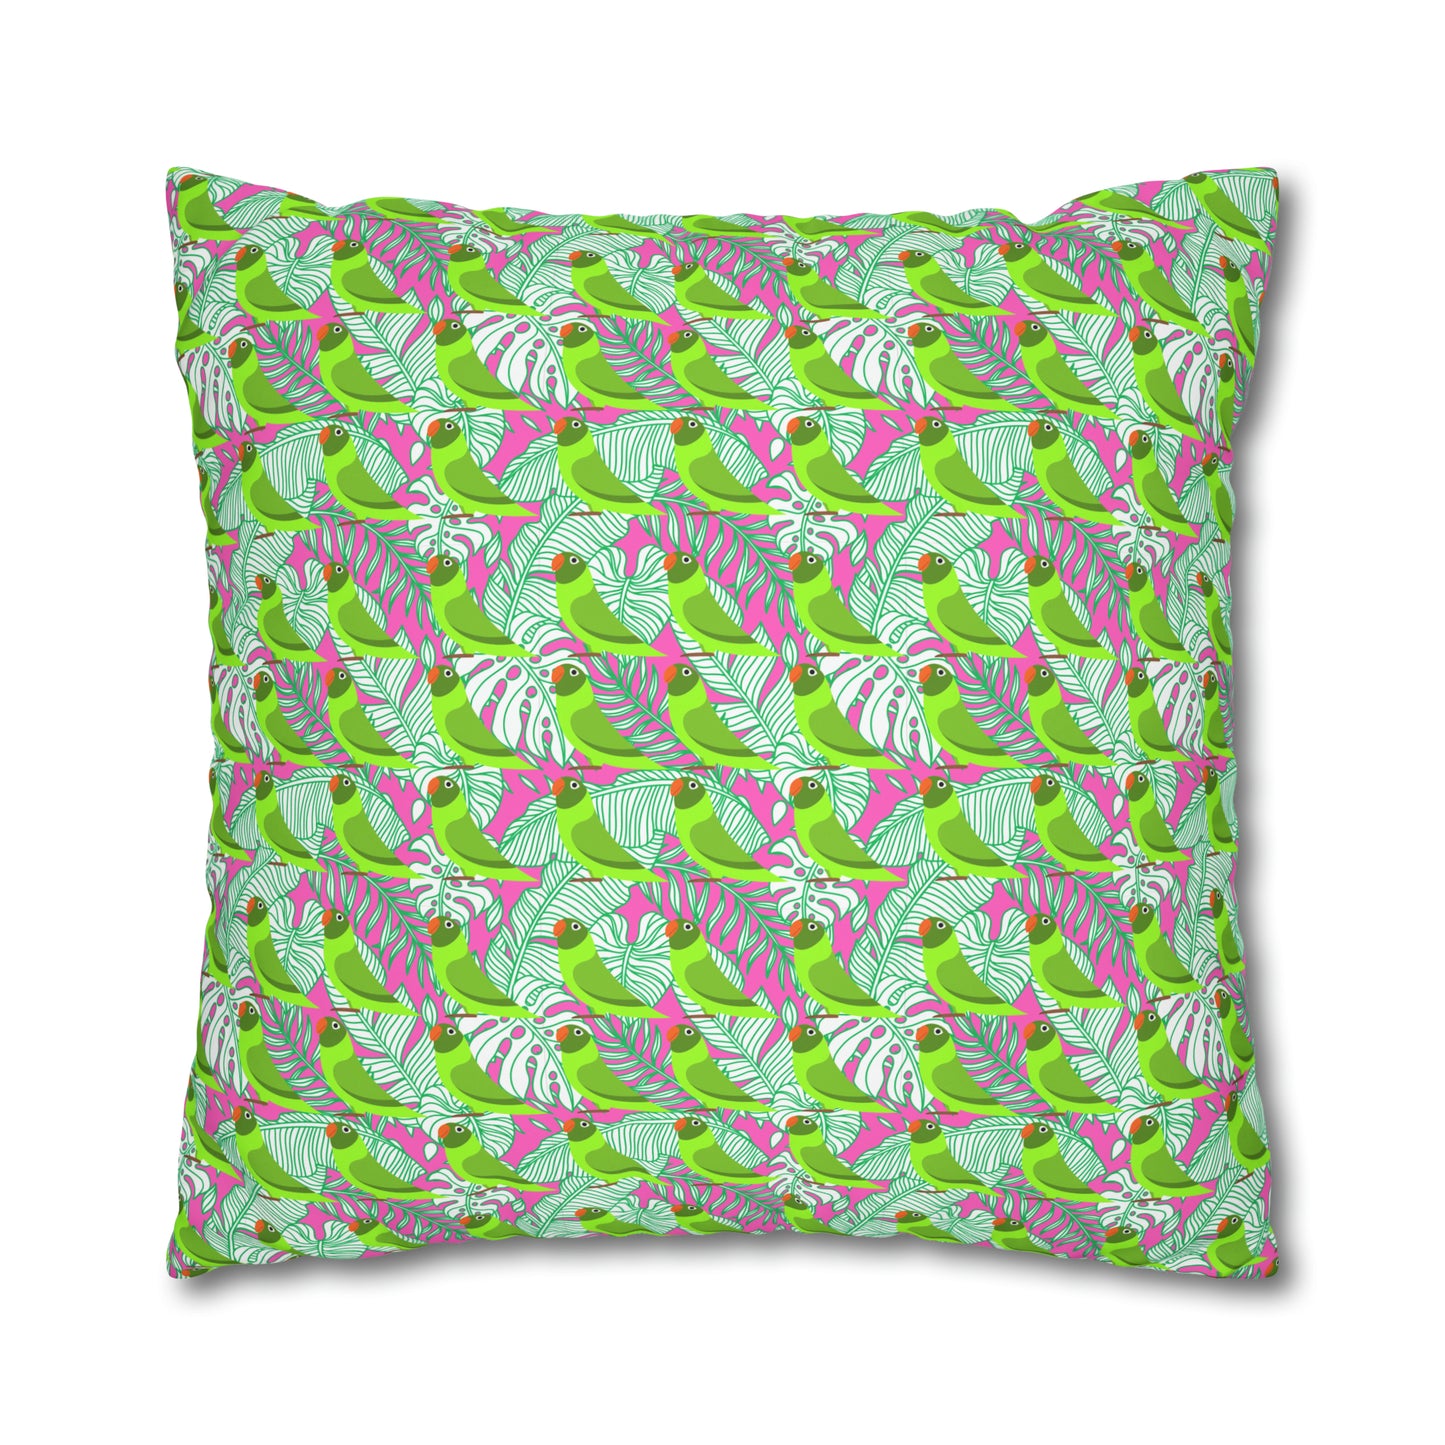 Parrots of Palm Beach Tropical Hot Pink Decorative Spun Polyester Pillow Cover